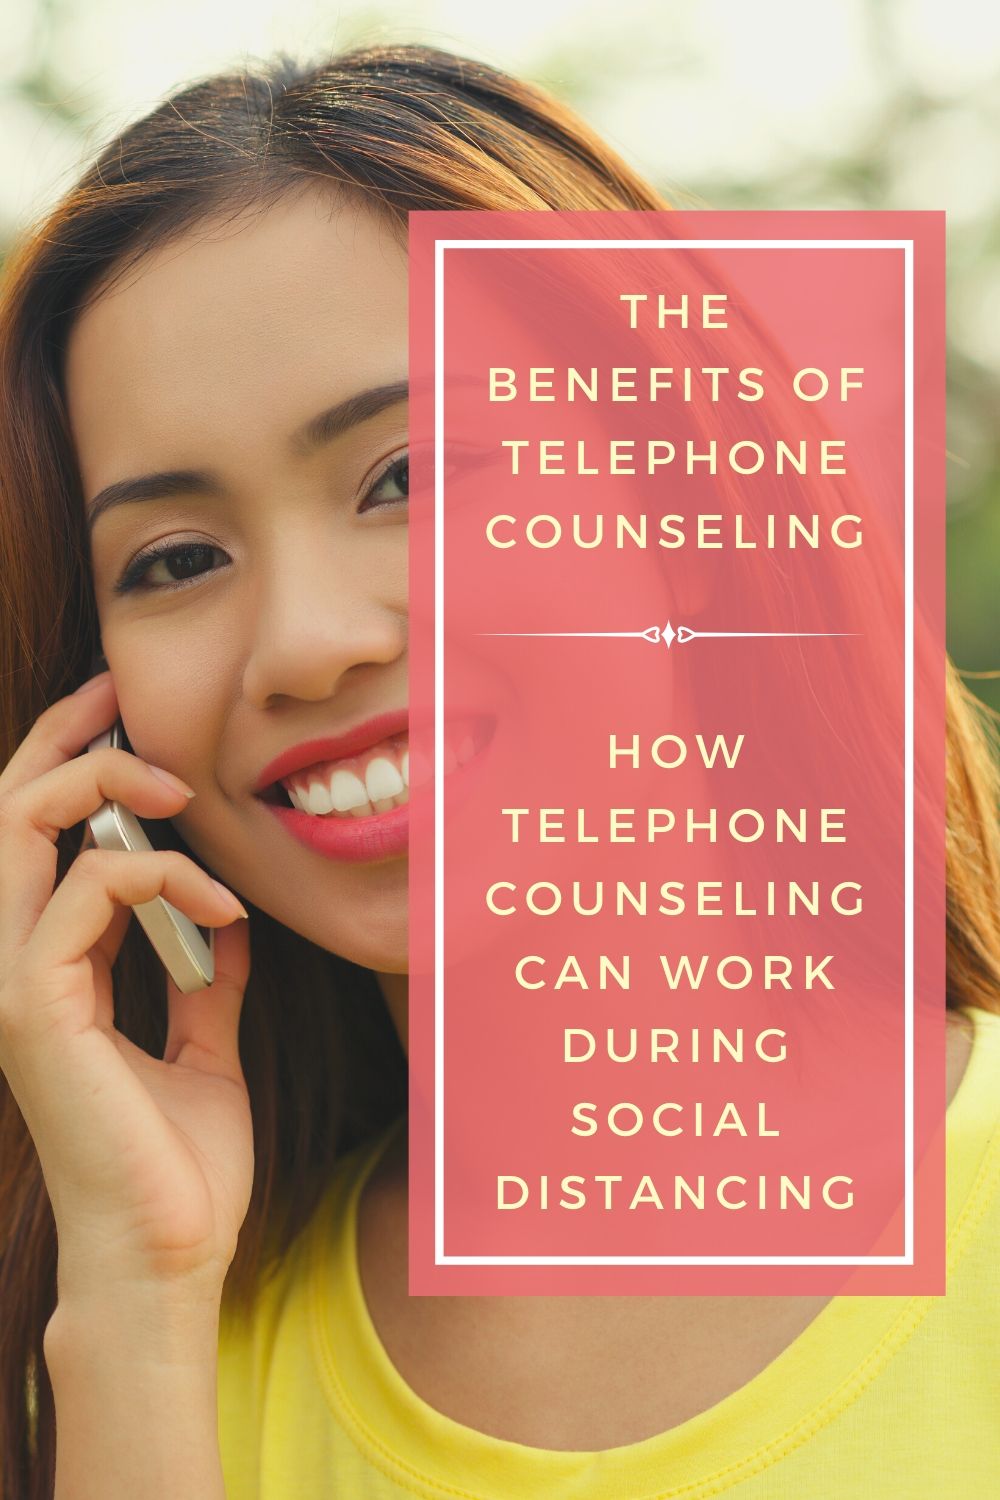 The Benefits of Telephone Counseling